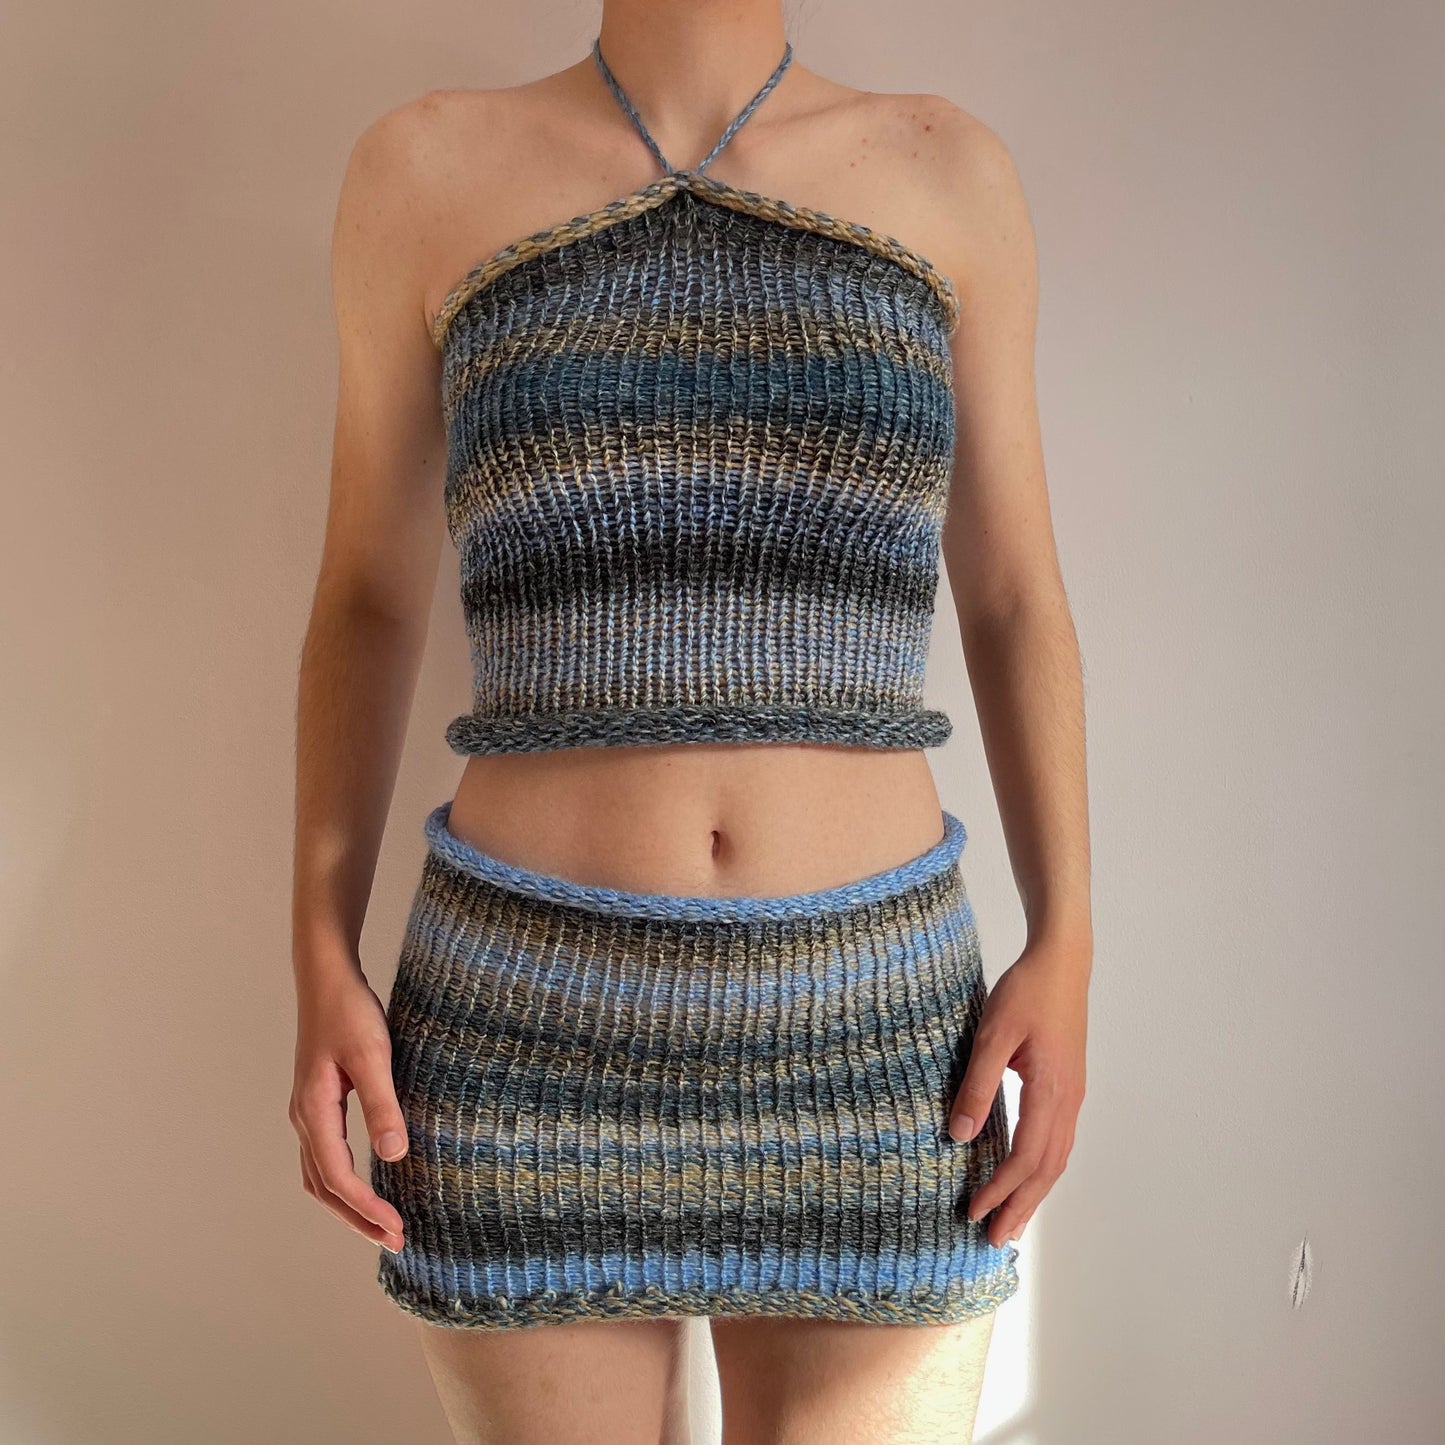 SET: Handmade knitted top and skirt in blue, beige and grey